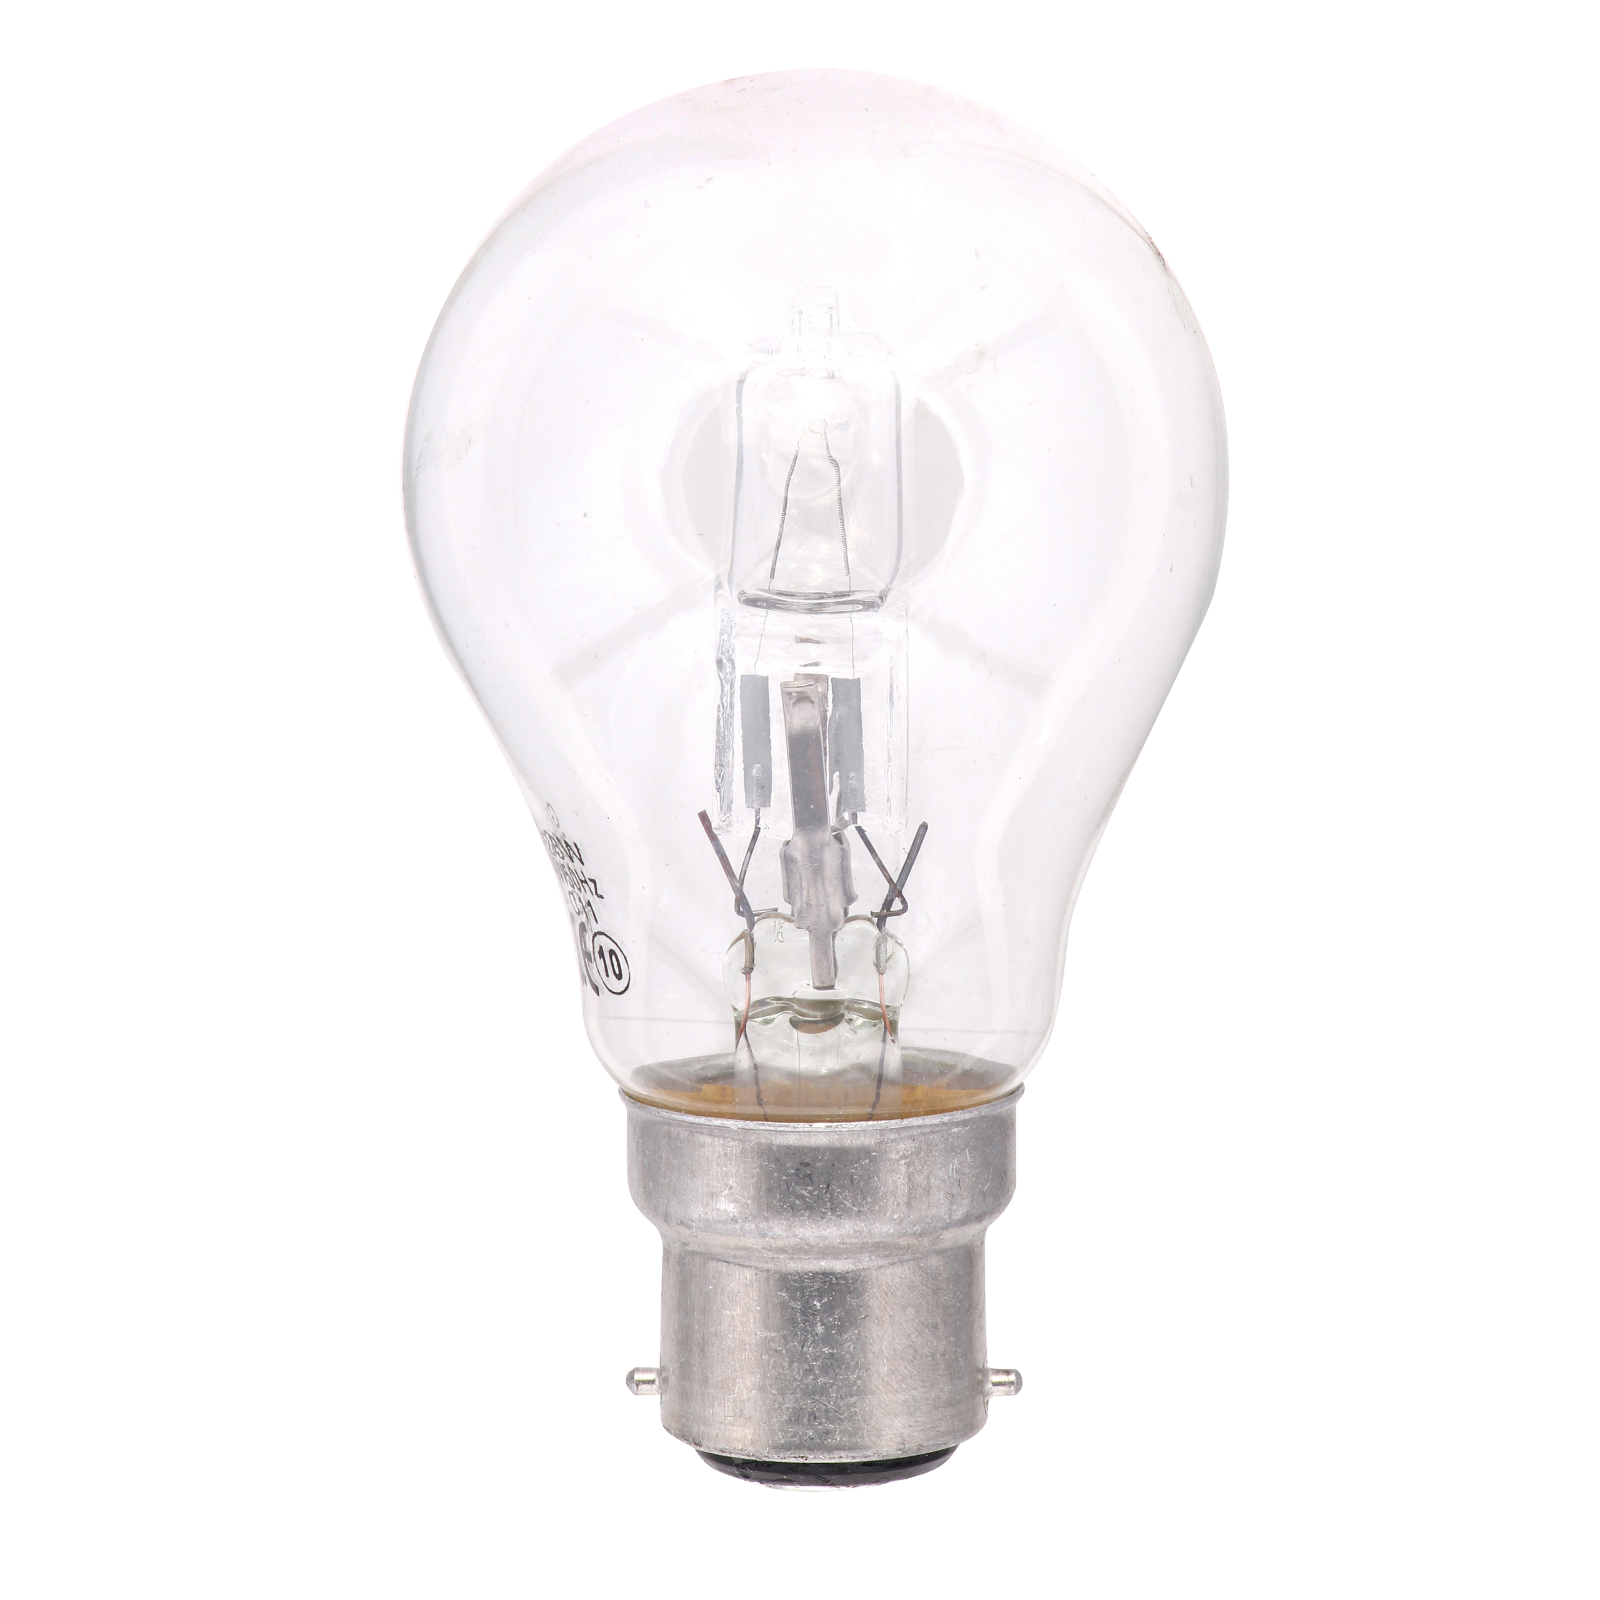 28W Halogen Energy Saving Clear GLS Lamp BC (equivalent To 40W) - HALO-G28BC 